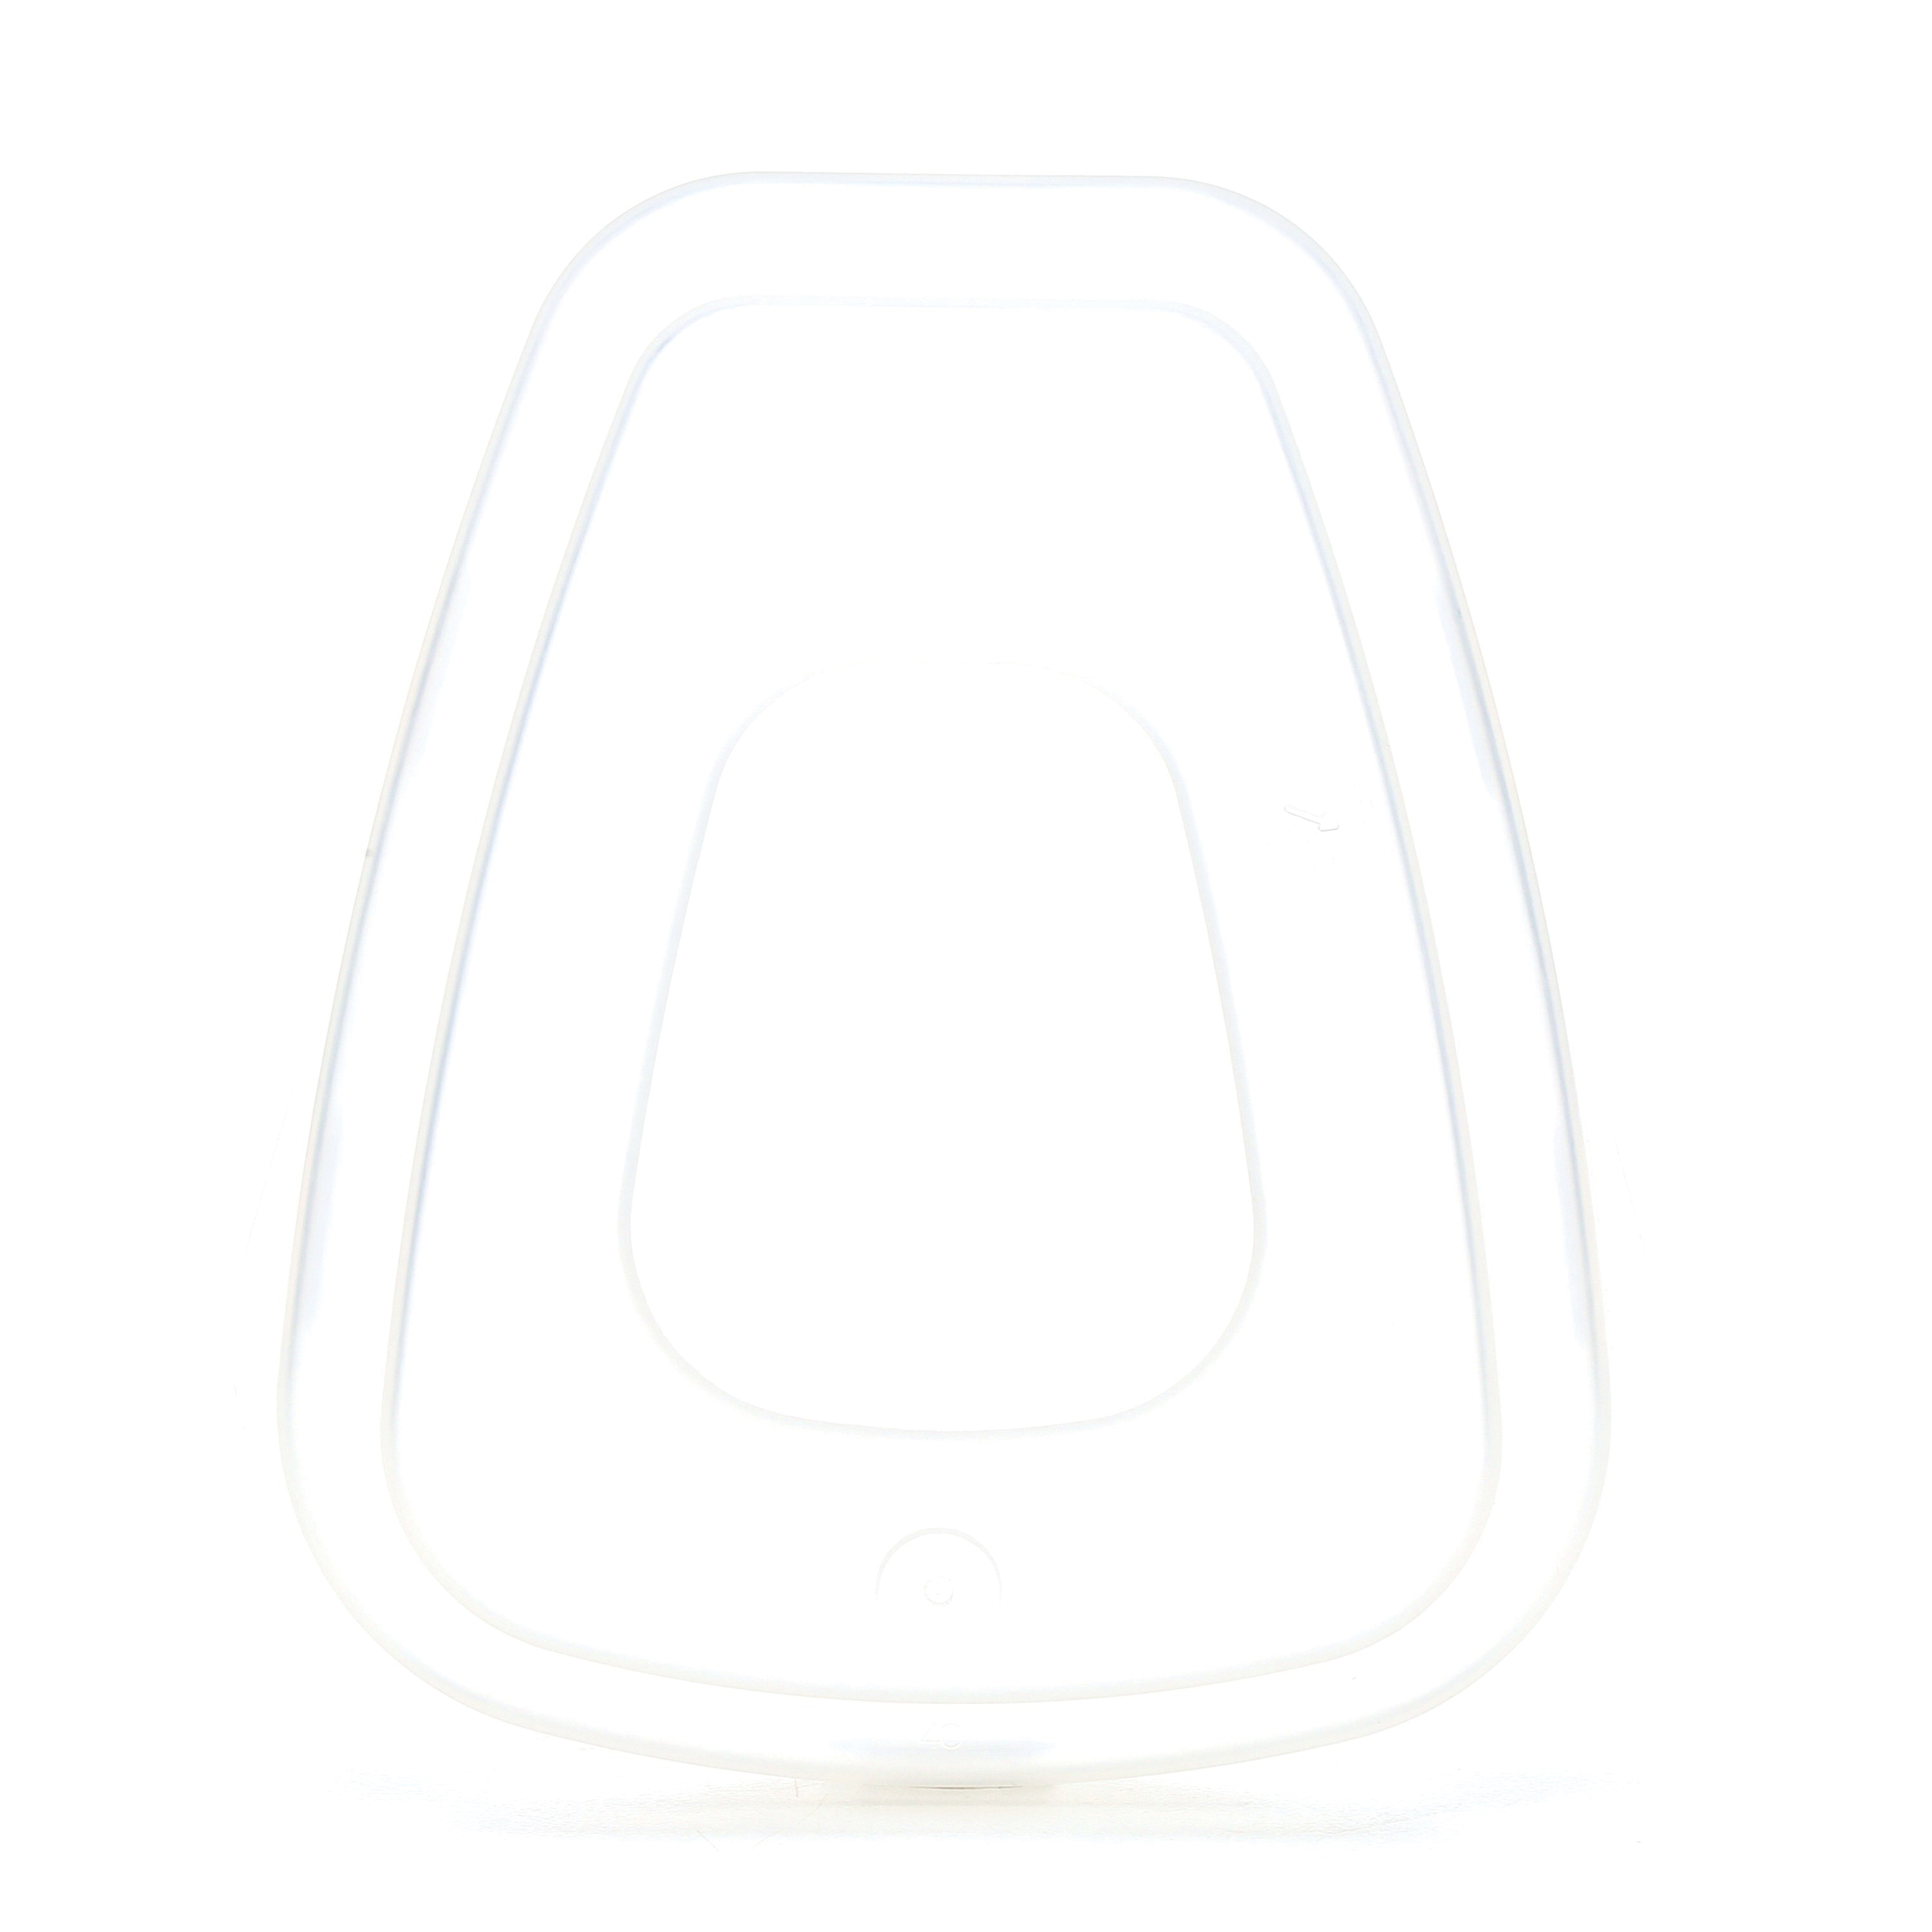 3M™ 051138-17668 Filter Retainer, For Use With 5000 and 6000 Series Respirators, Translucent White